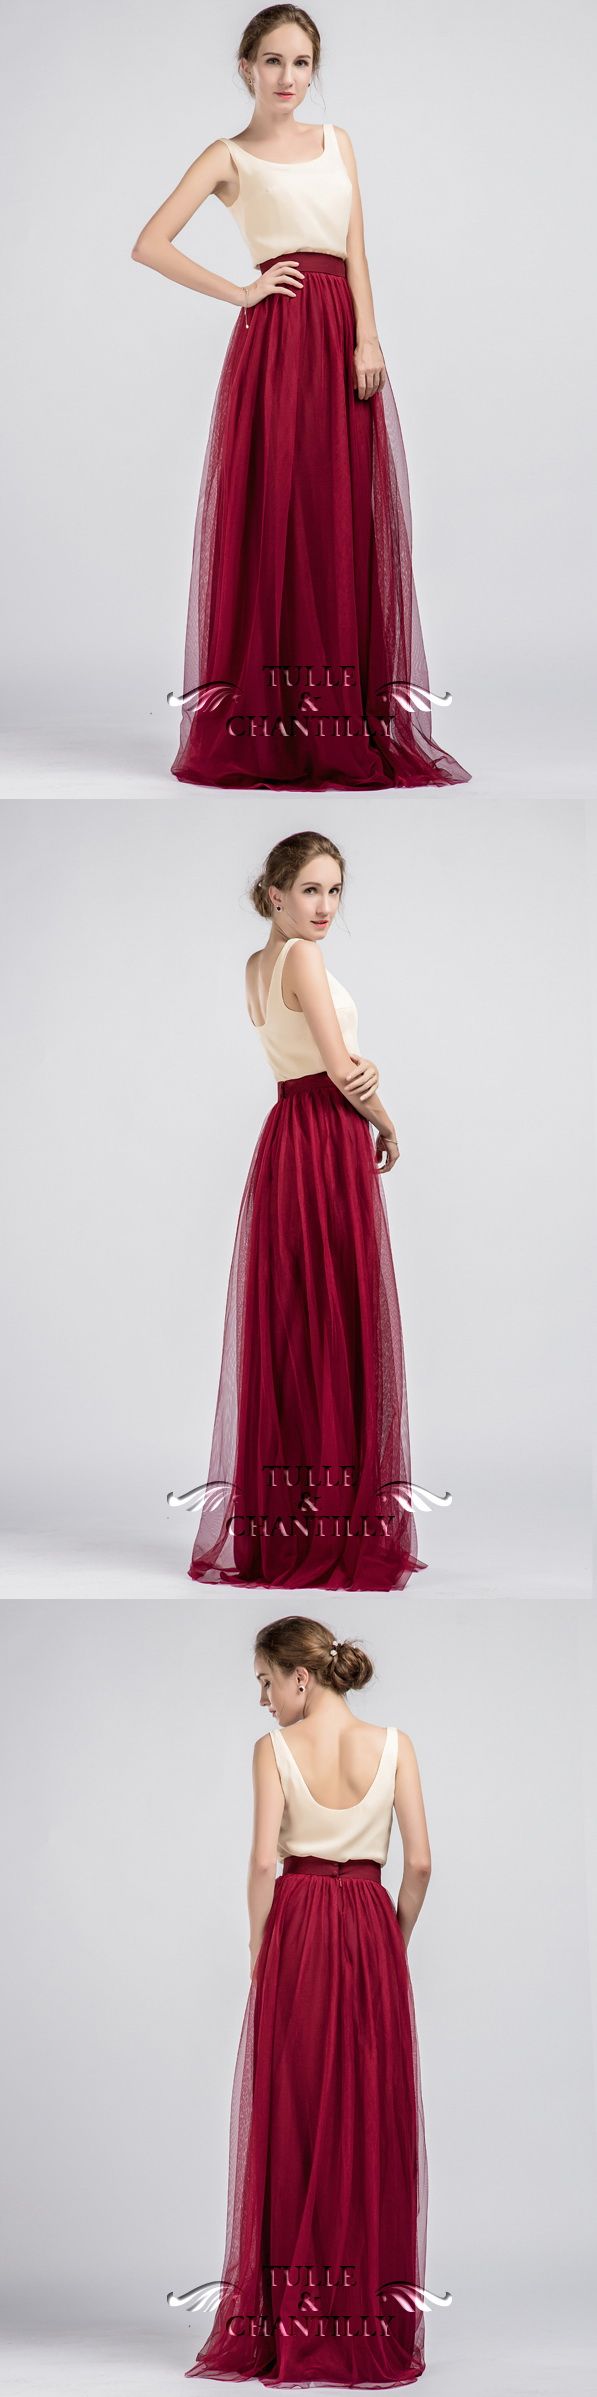 Hochzeit - Long Two Piece Bridesmaid Dresses With Marsala Tulle Skirt [TBQP335] - $169.00 : Custom Made Wedding, Prom, Evening Dresses Online